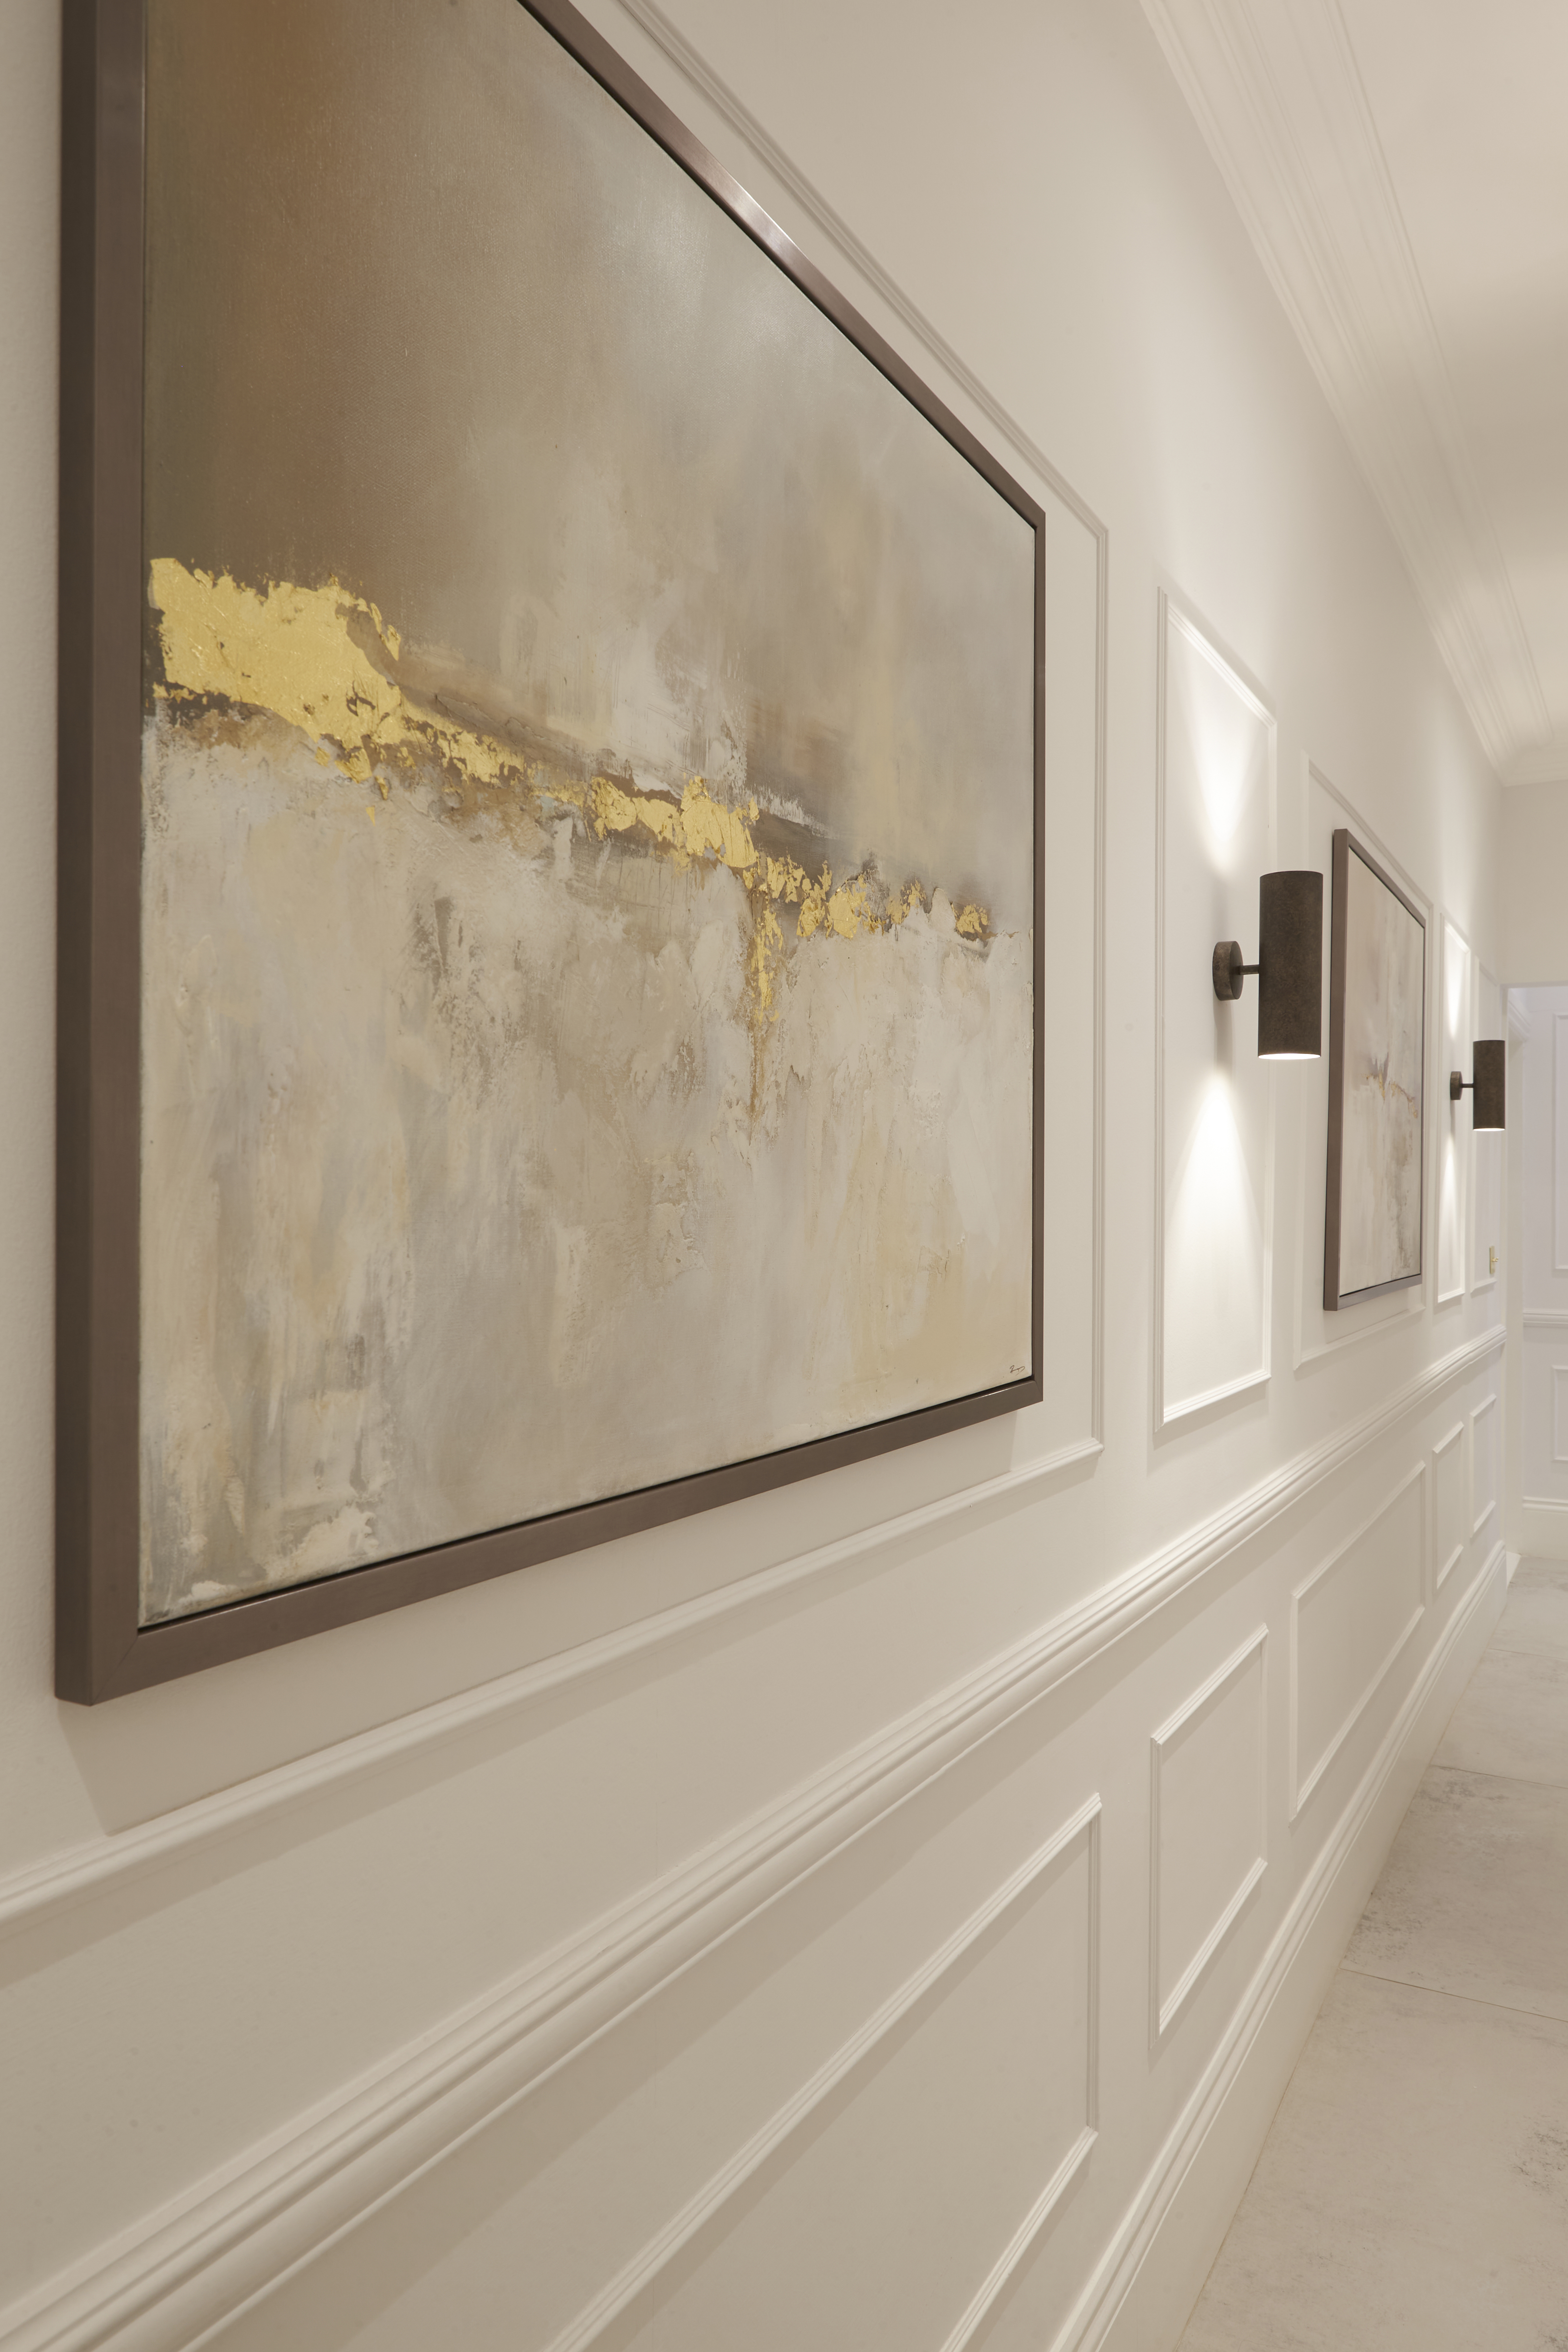 Art gallery in long narrow hallway with wall paneling